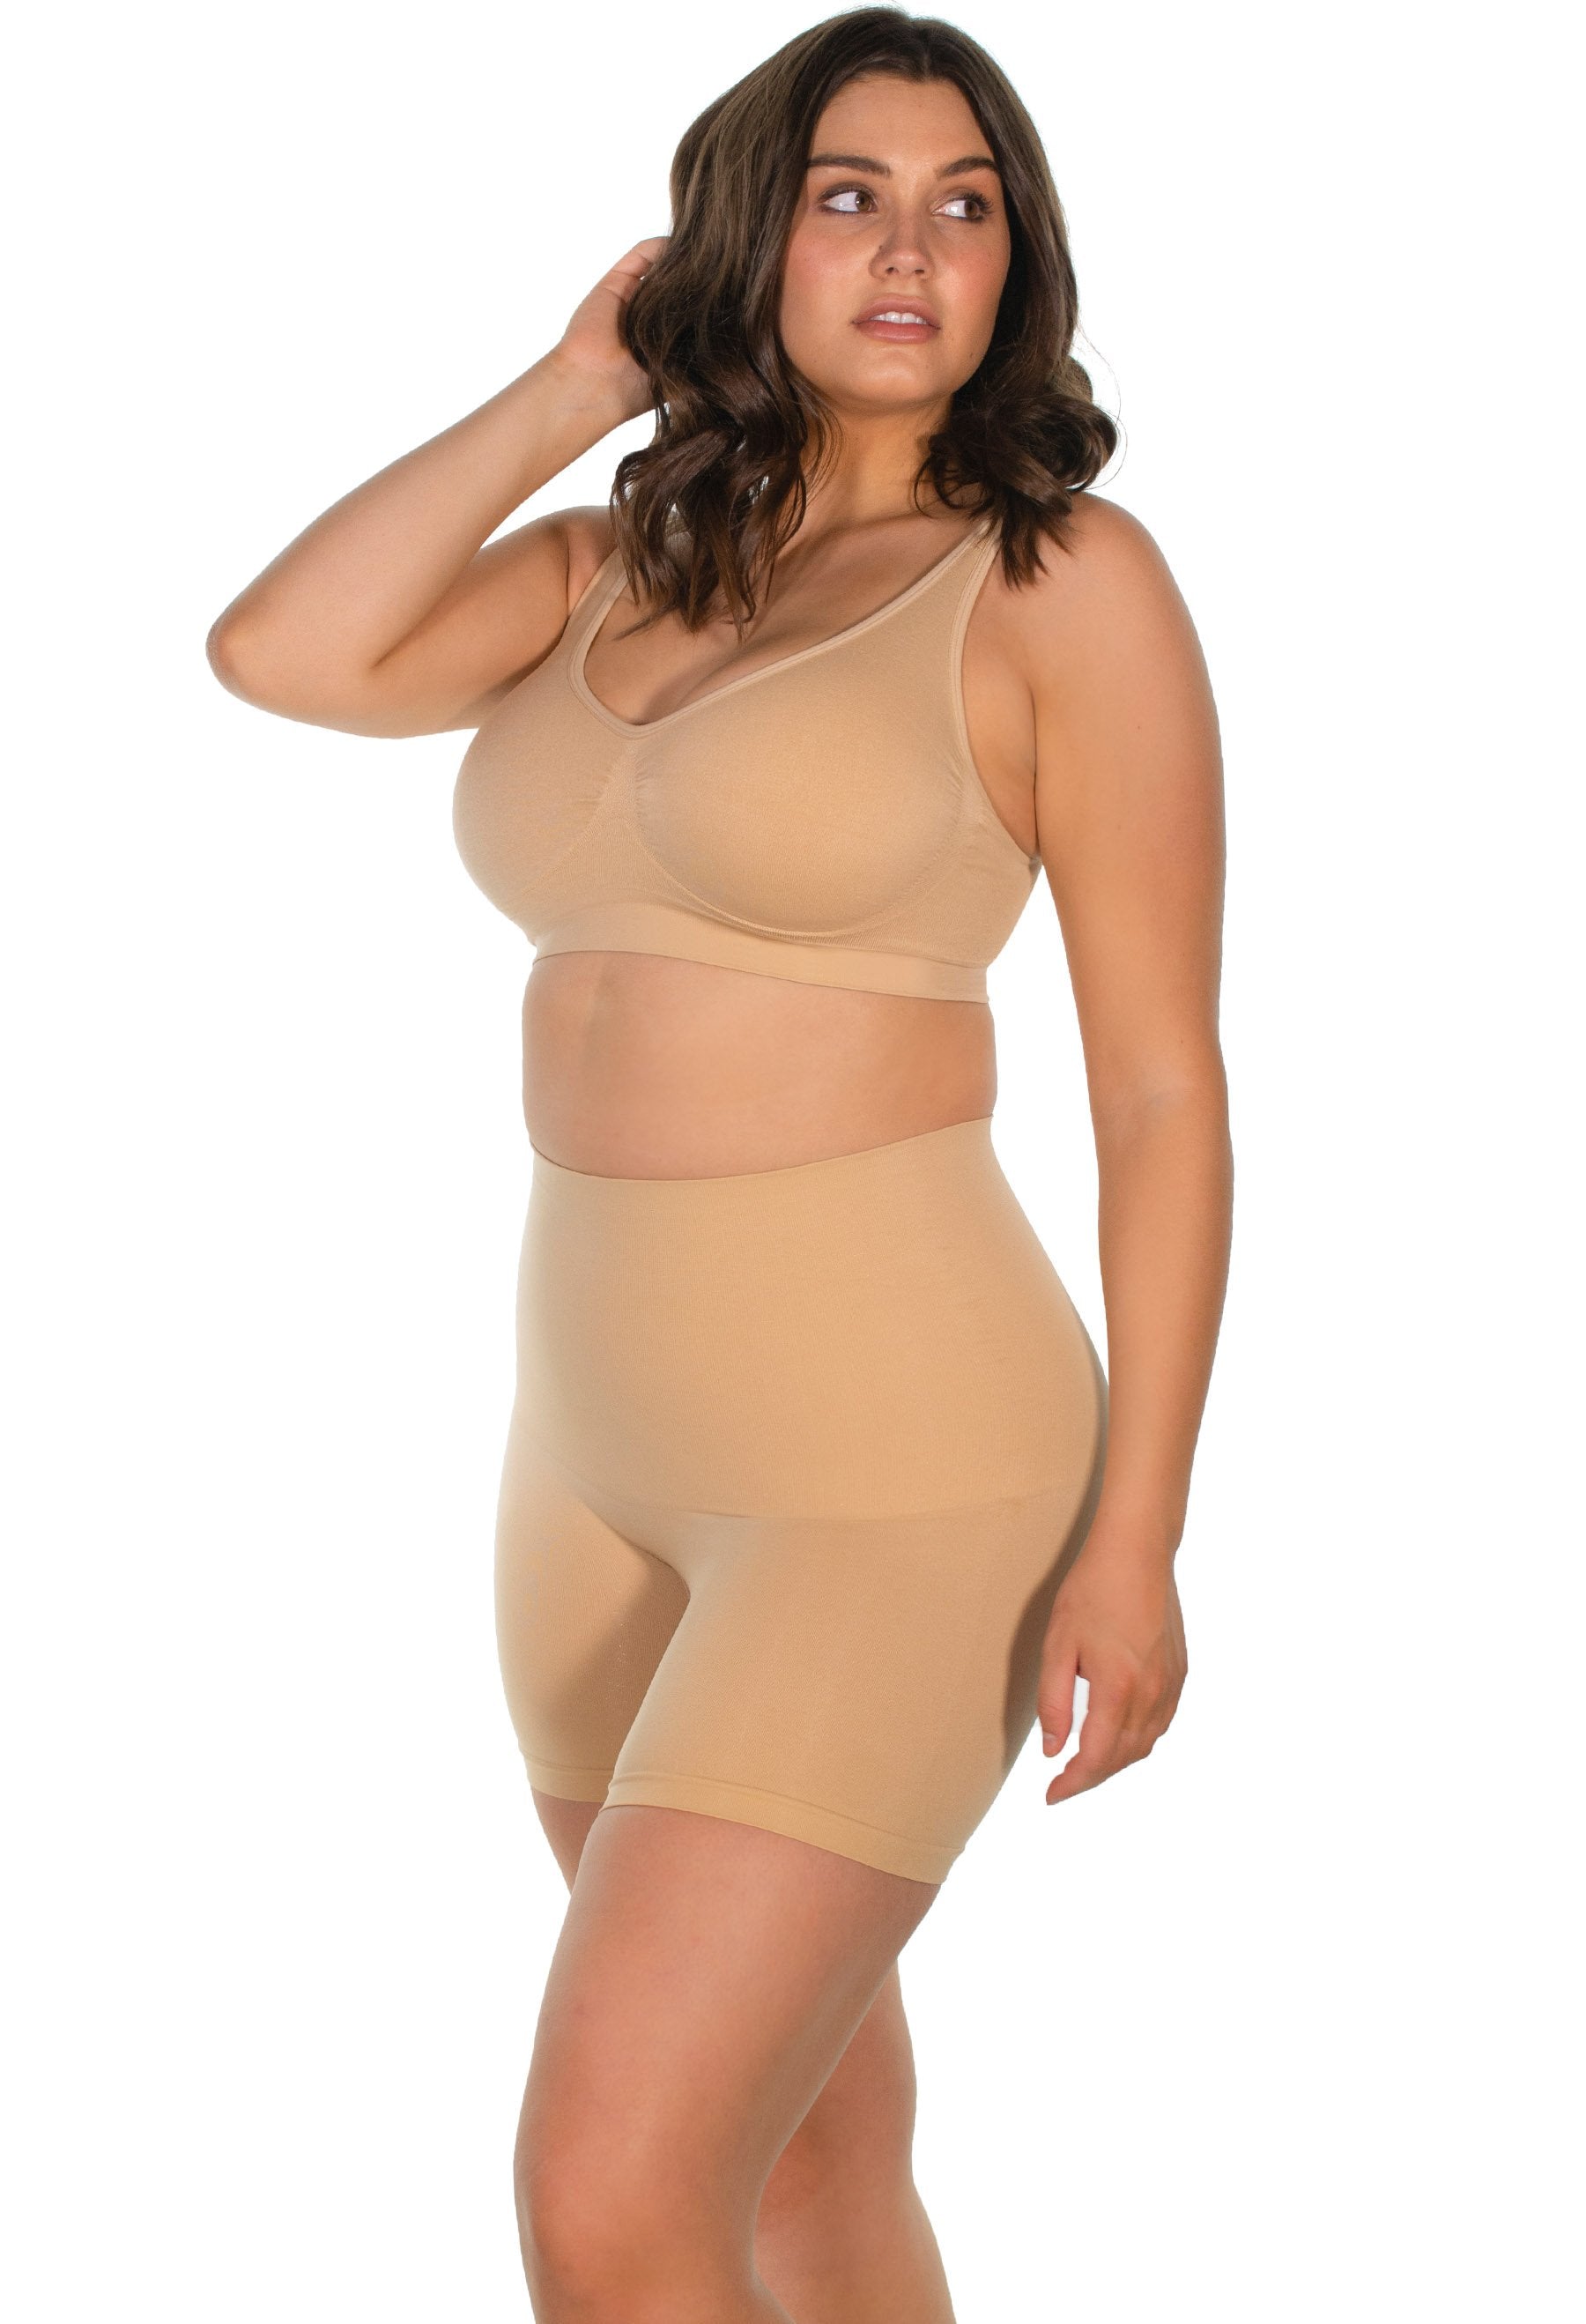 Plus Size Shapewear with Tummy Control Size 14 to 24, Sonsee Woman